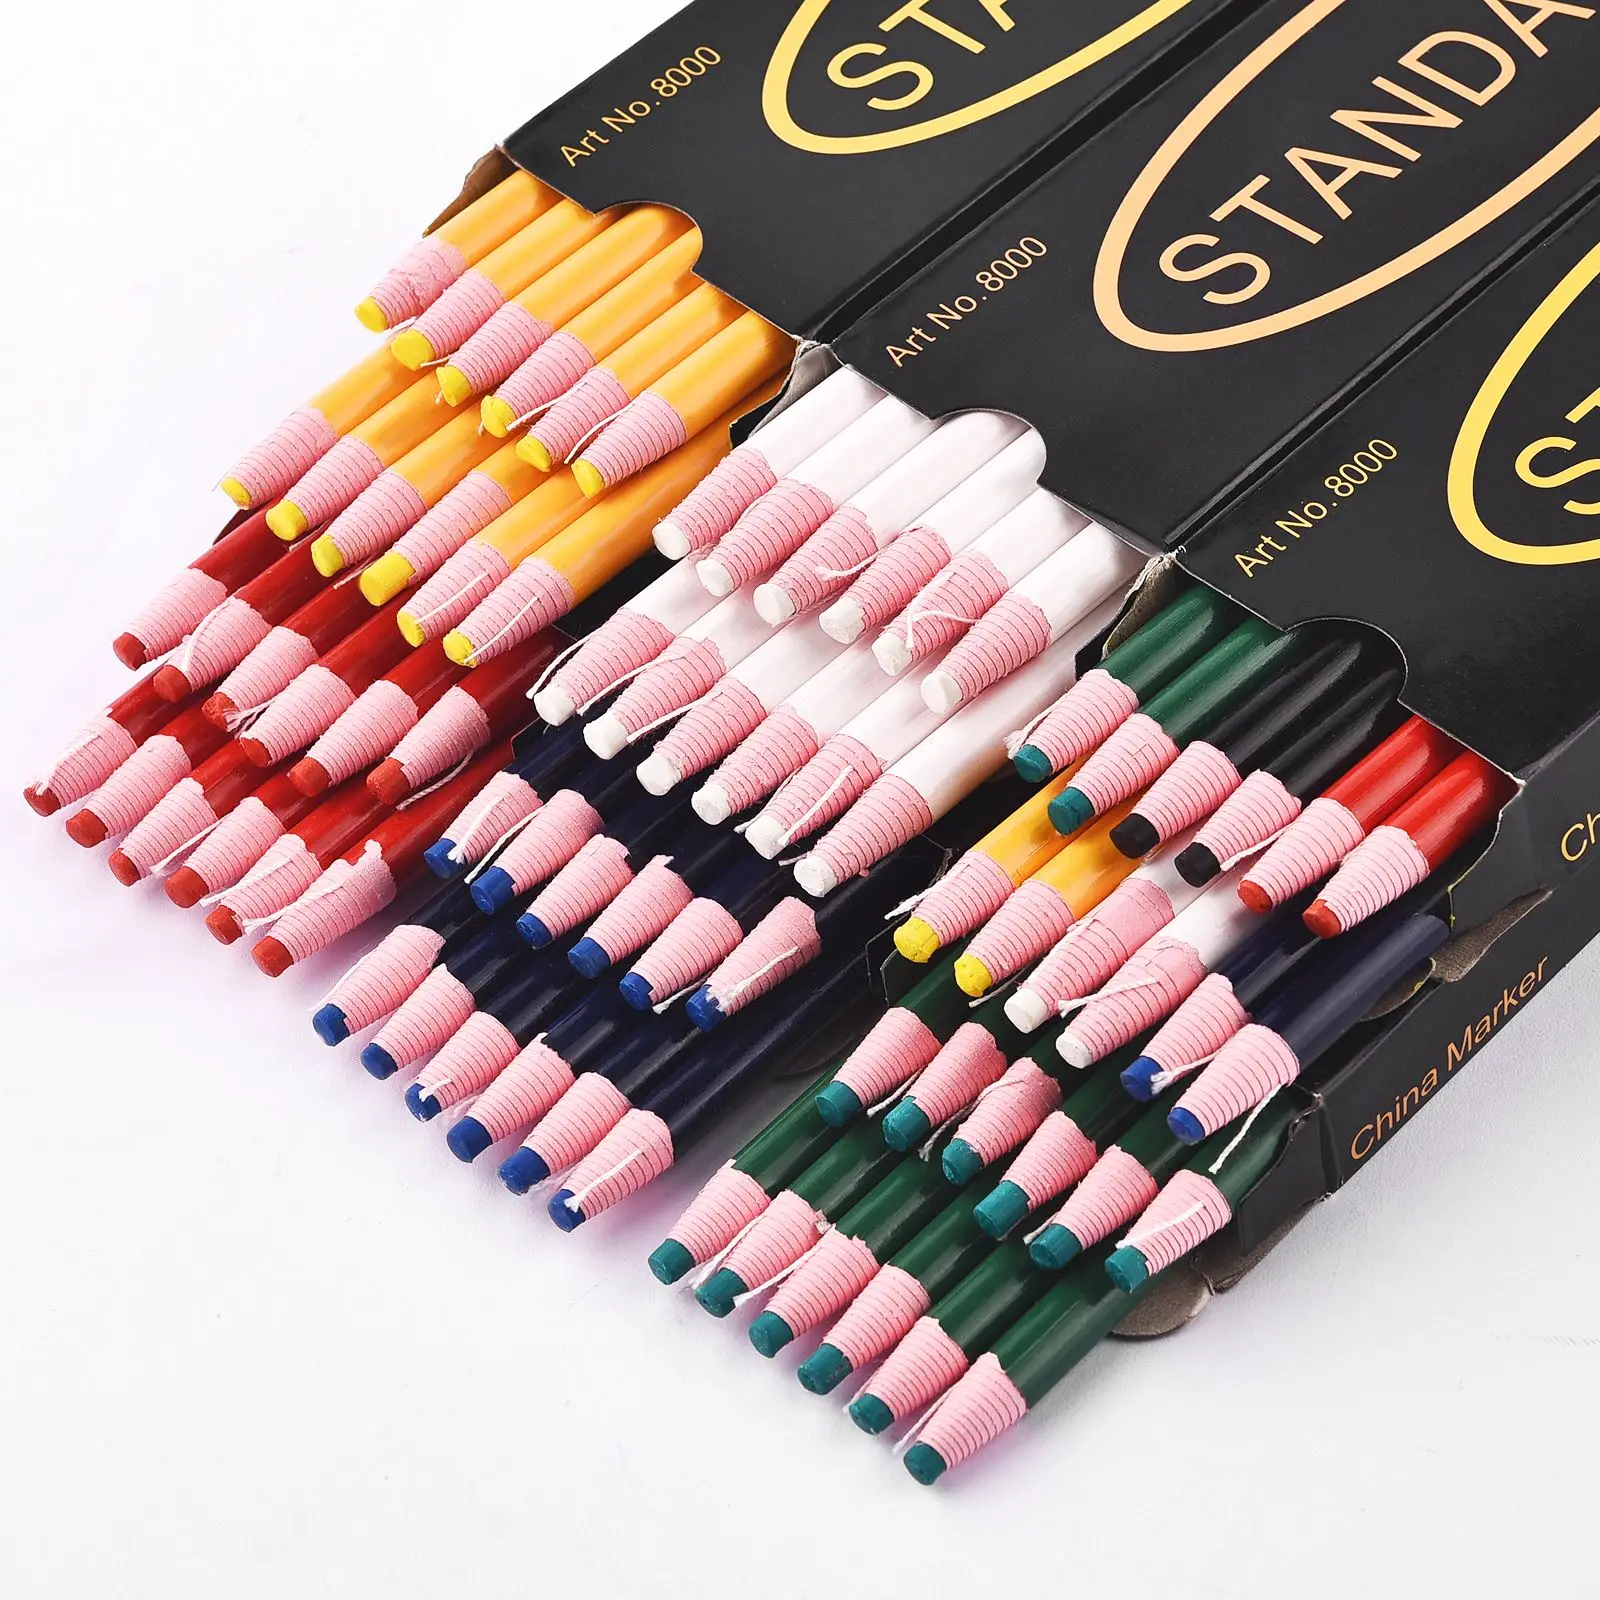 

12pcs/Box Colorful Sewing Chalk Tailor'S Cut-Free Pencils Fabric Marker Pen For Patchwork DIY Clothing Tools Garment Accessories